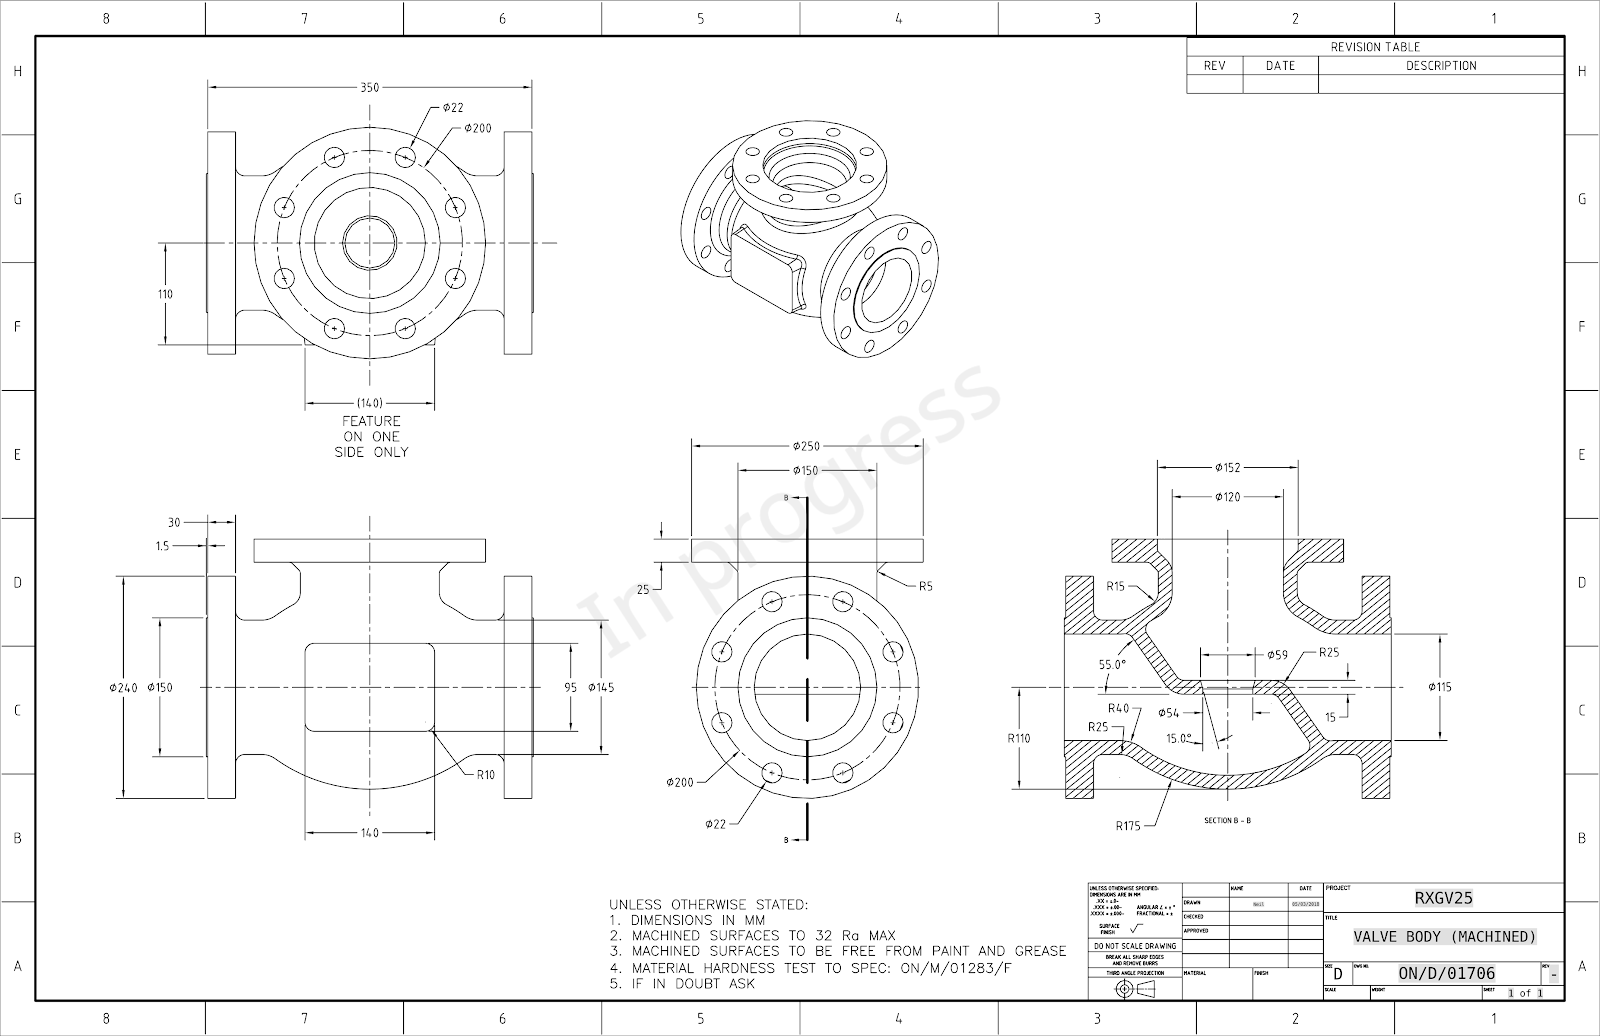 Screenshot of a typical manufacturing drawing, which can potentially become out-of-date the moment it is created.